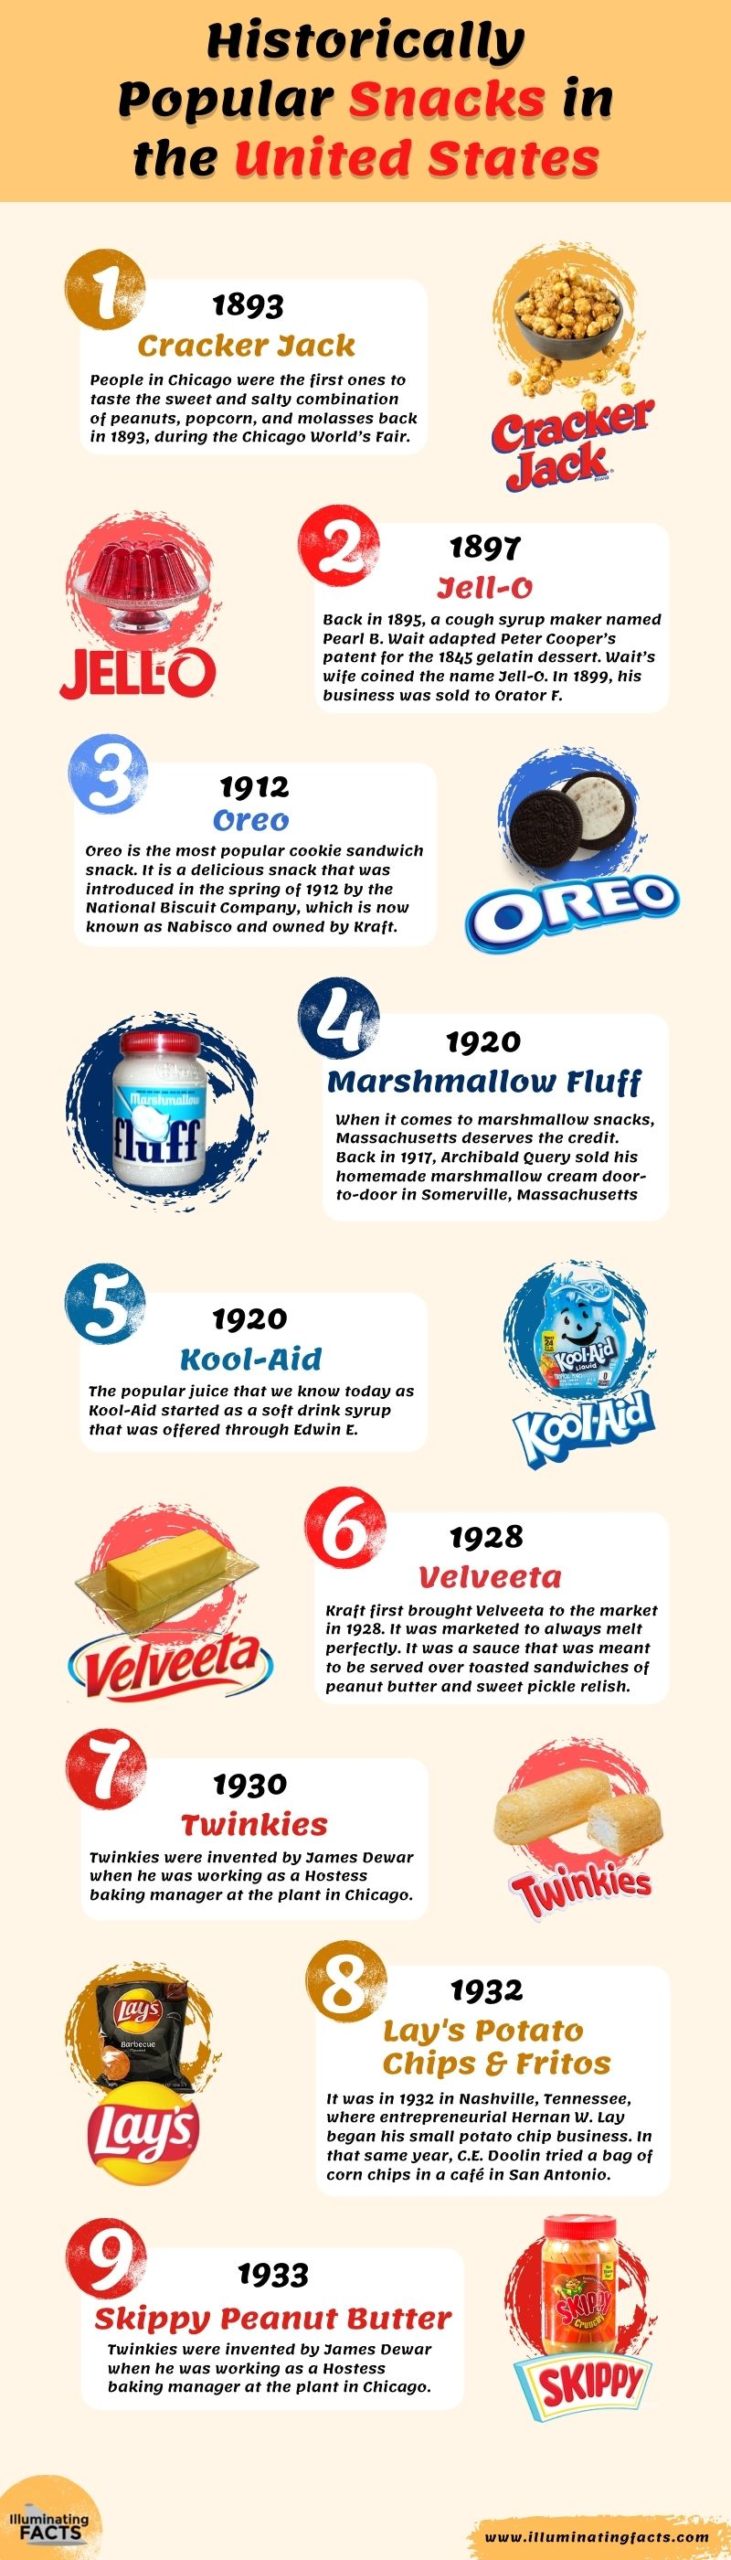 Historically Popular Snacks in the United States Infographic